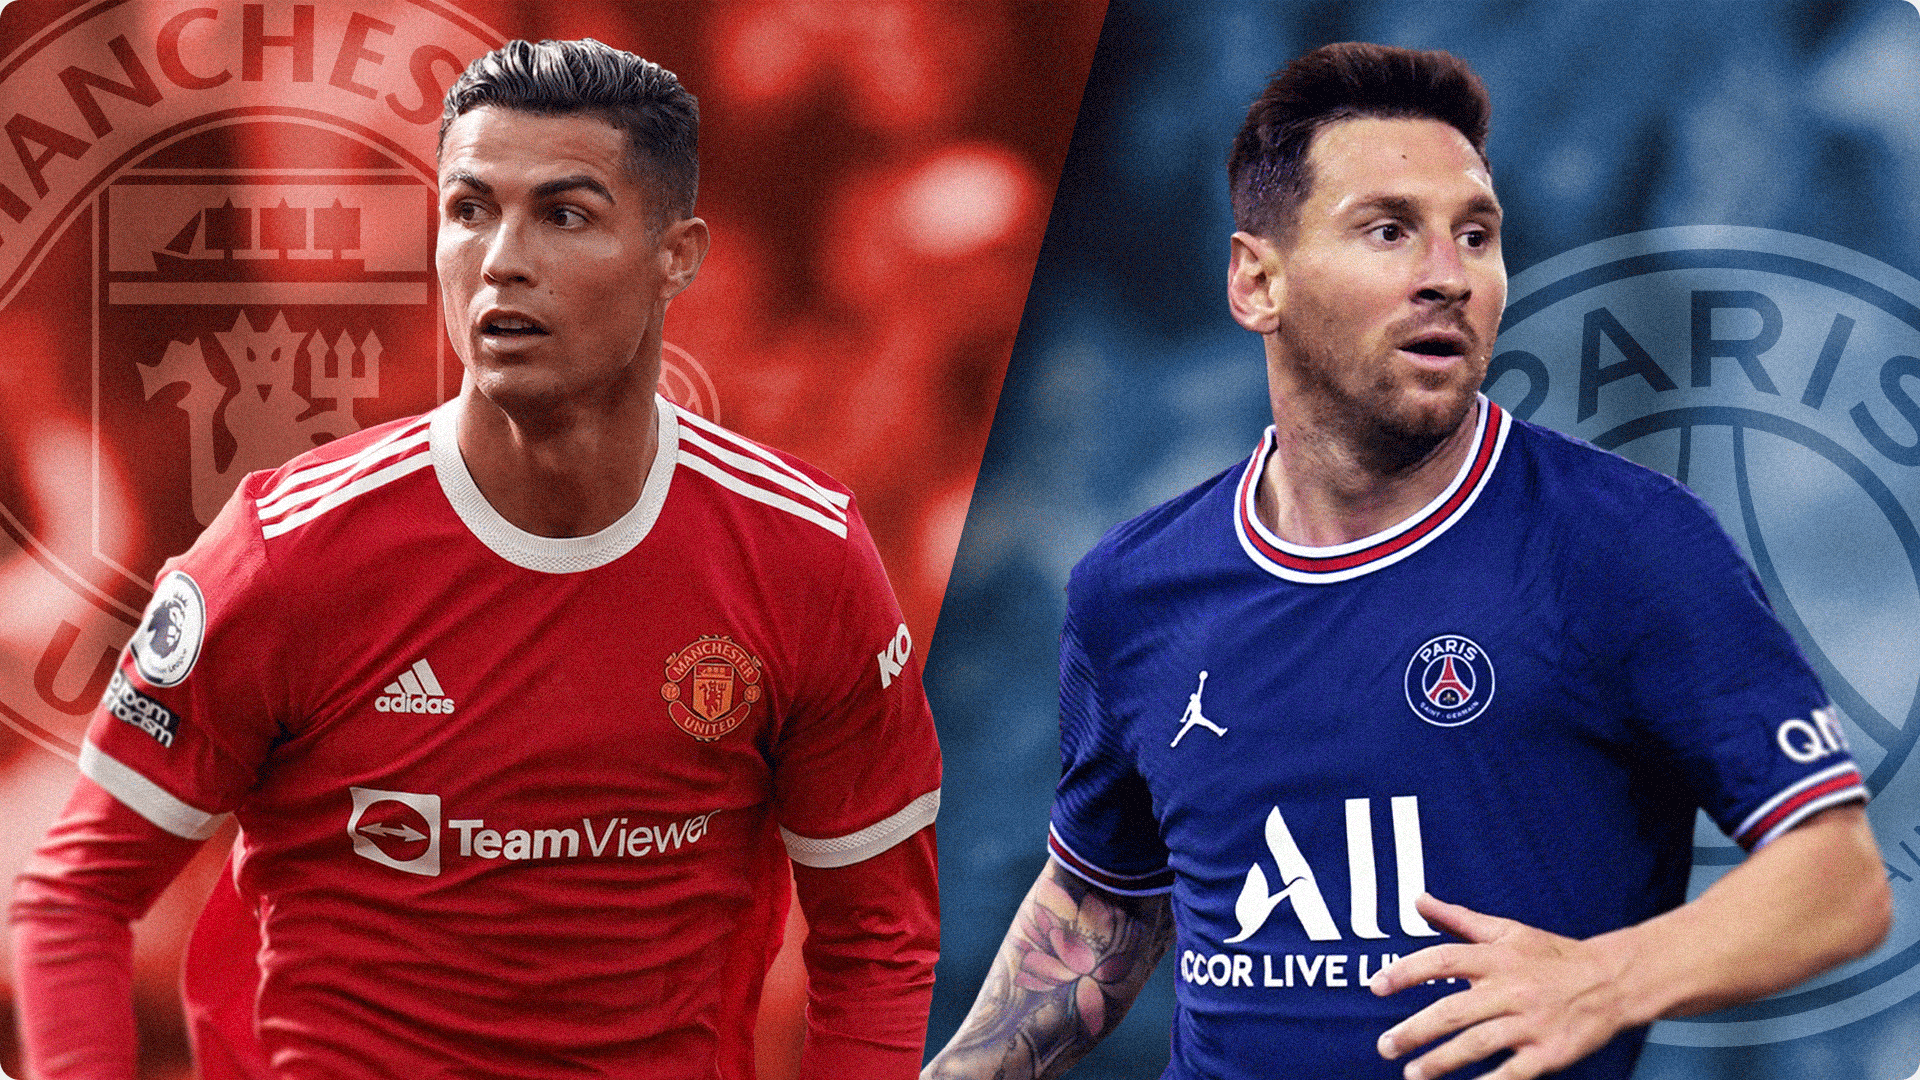 Cristiano Ronaldo overtakes Lionel Messi to become Forbes' highest-paid footballer in the world